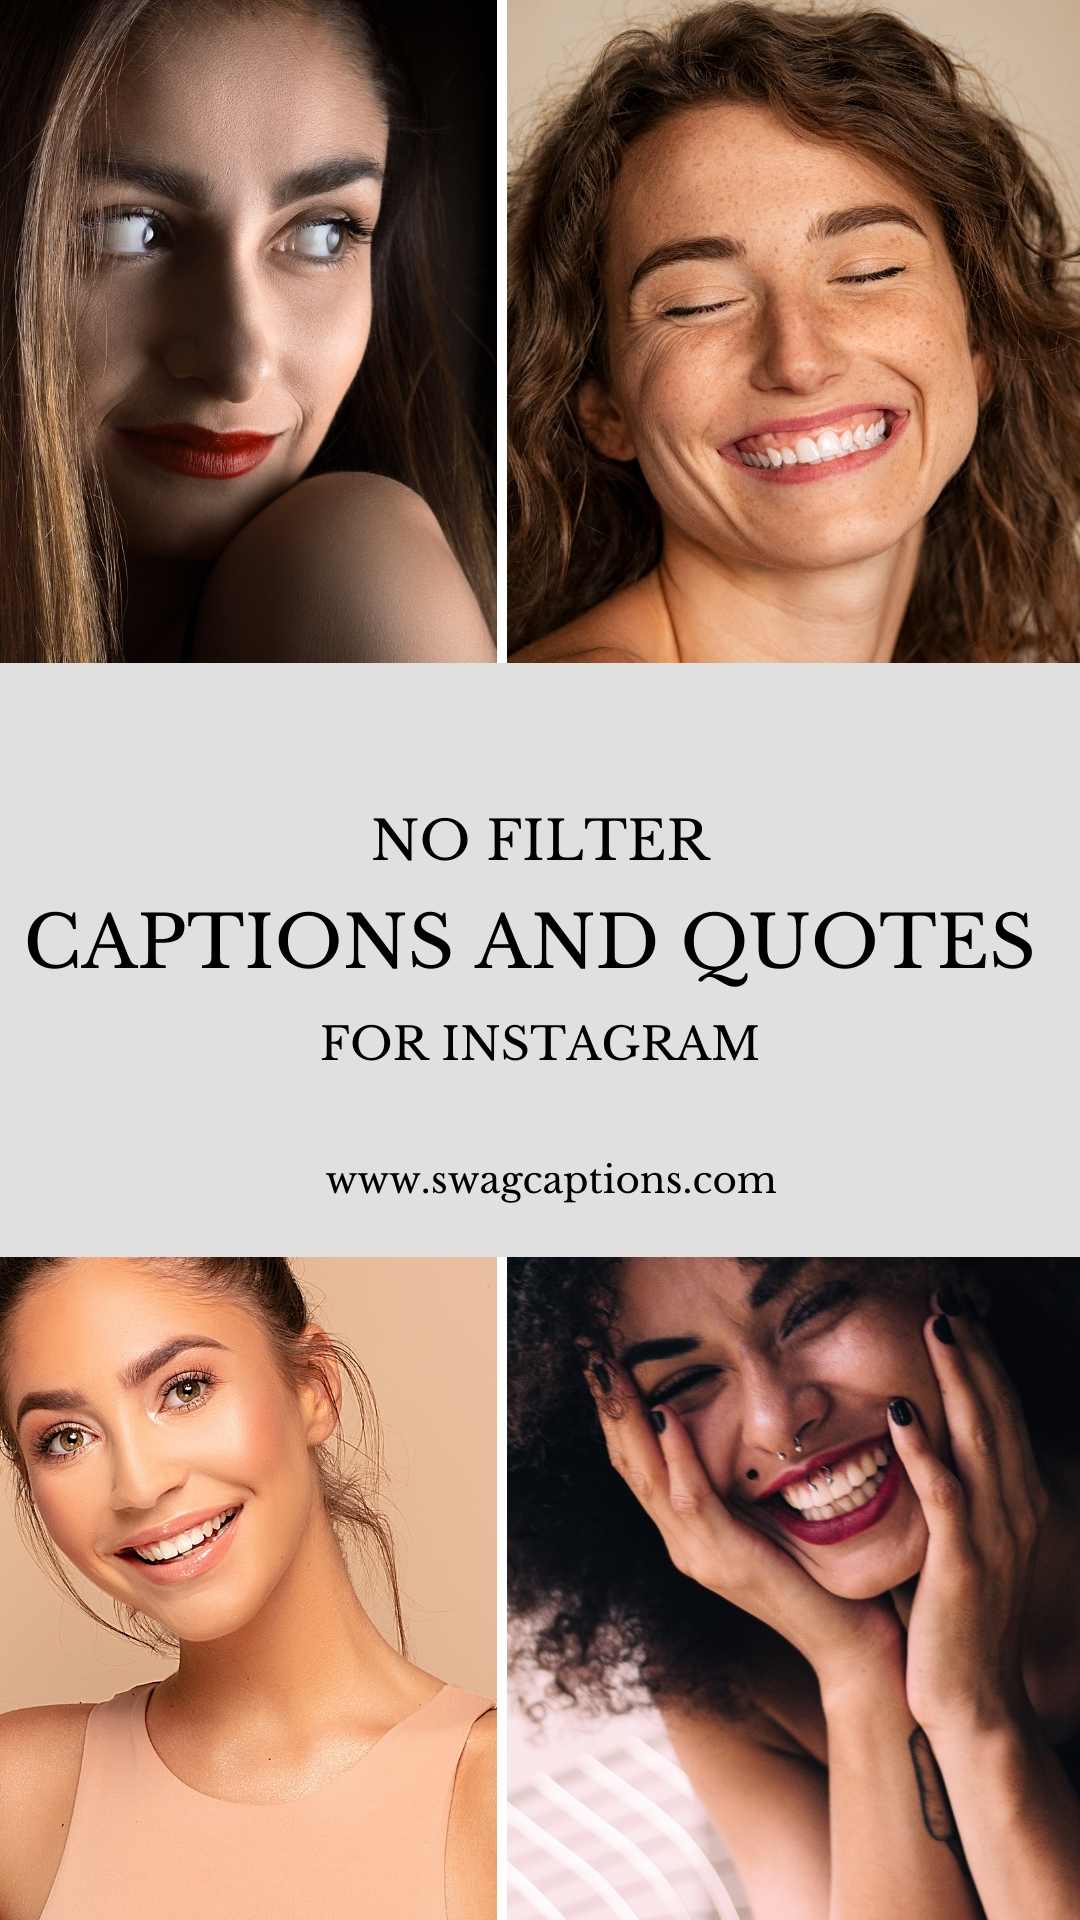 no filter captions and quotes for Instagram